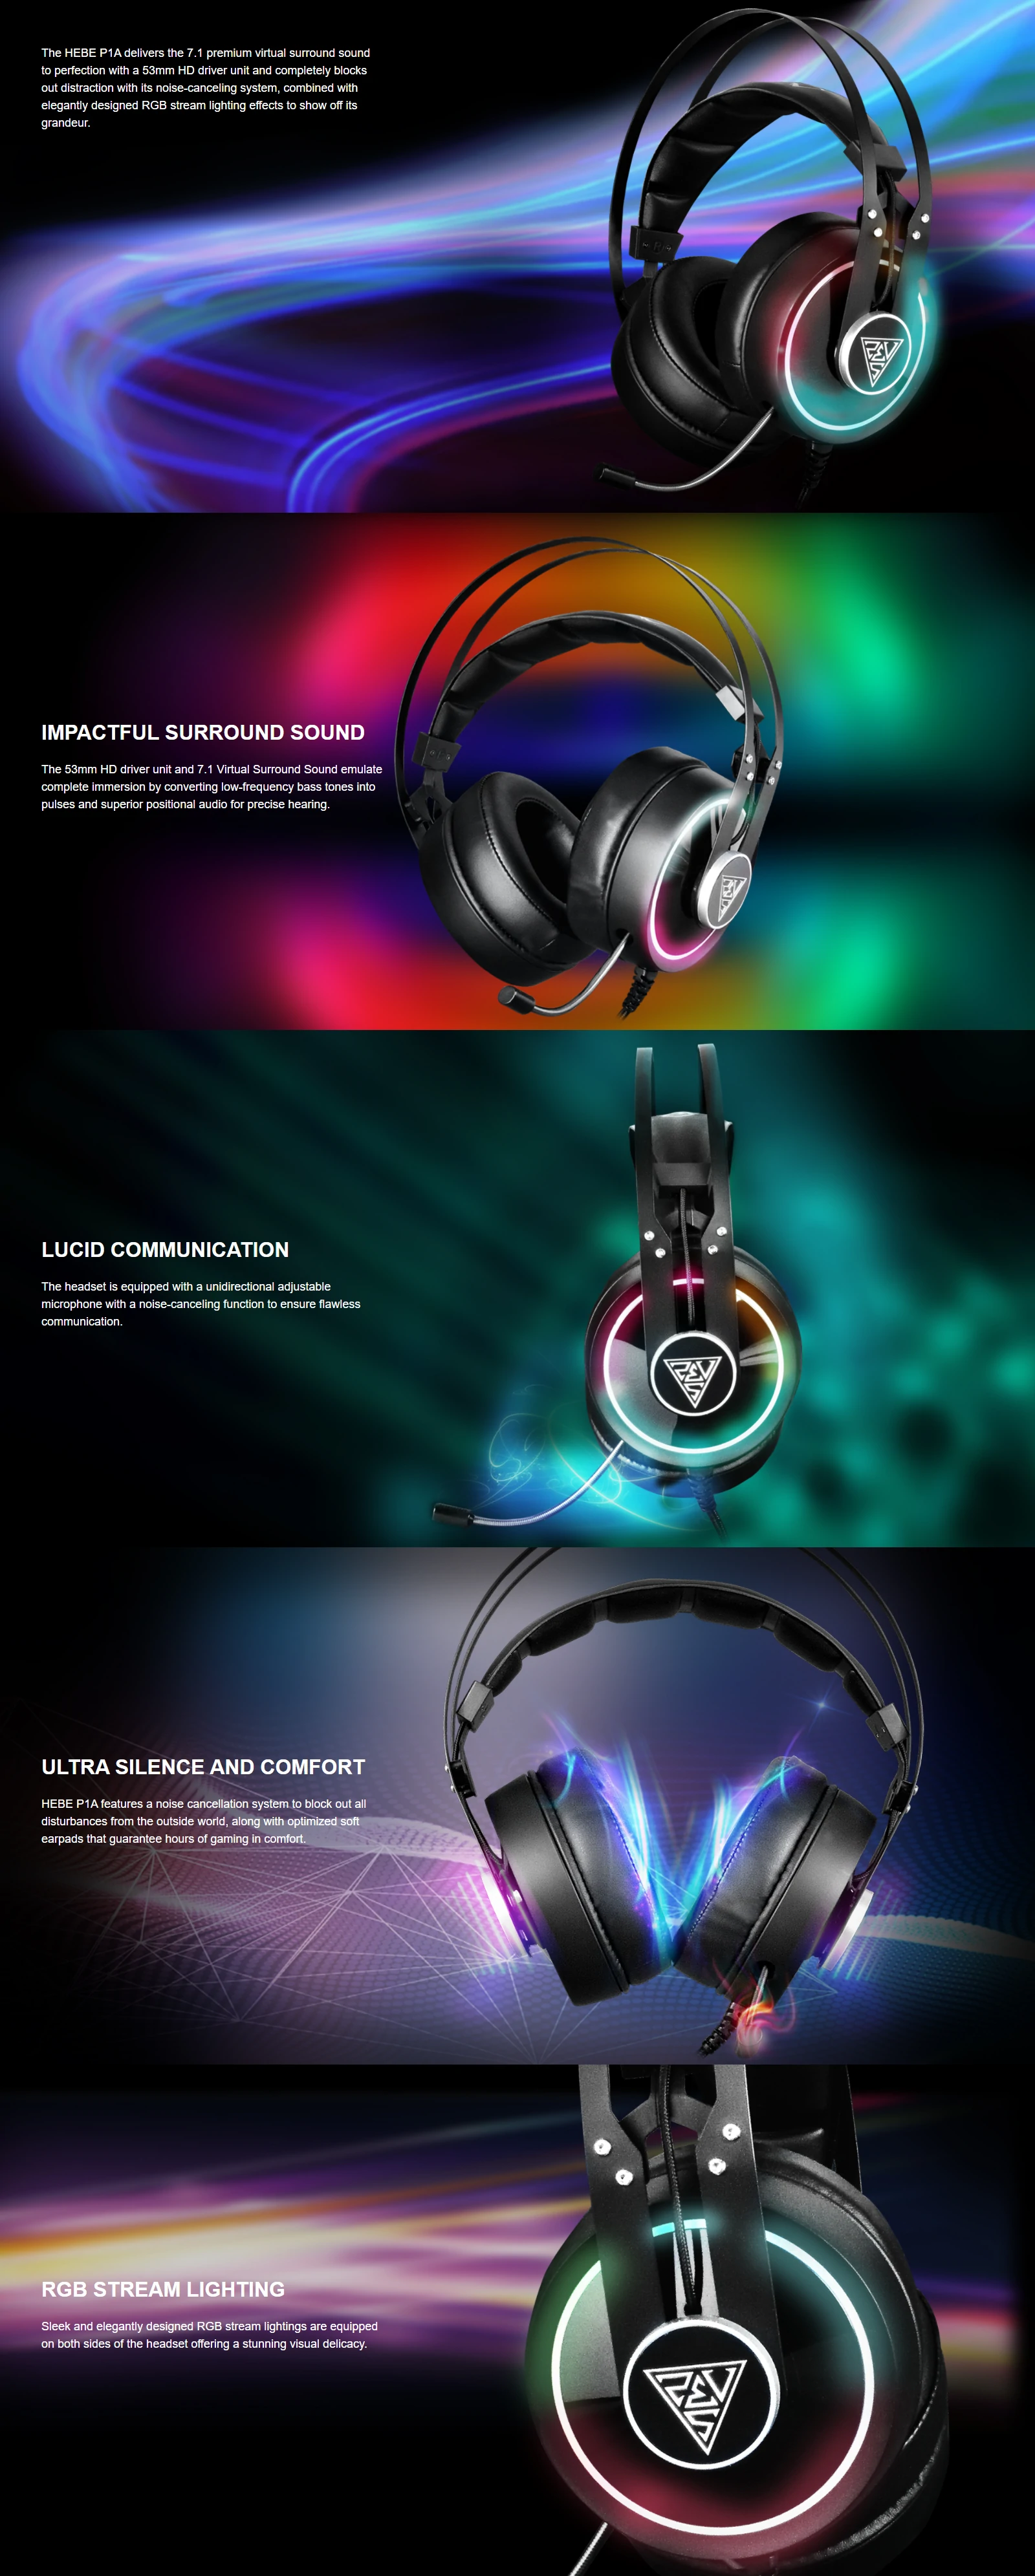 Overview - Gamdias - Hebe P1A RGB Surround Sound Gaming Headset